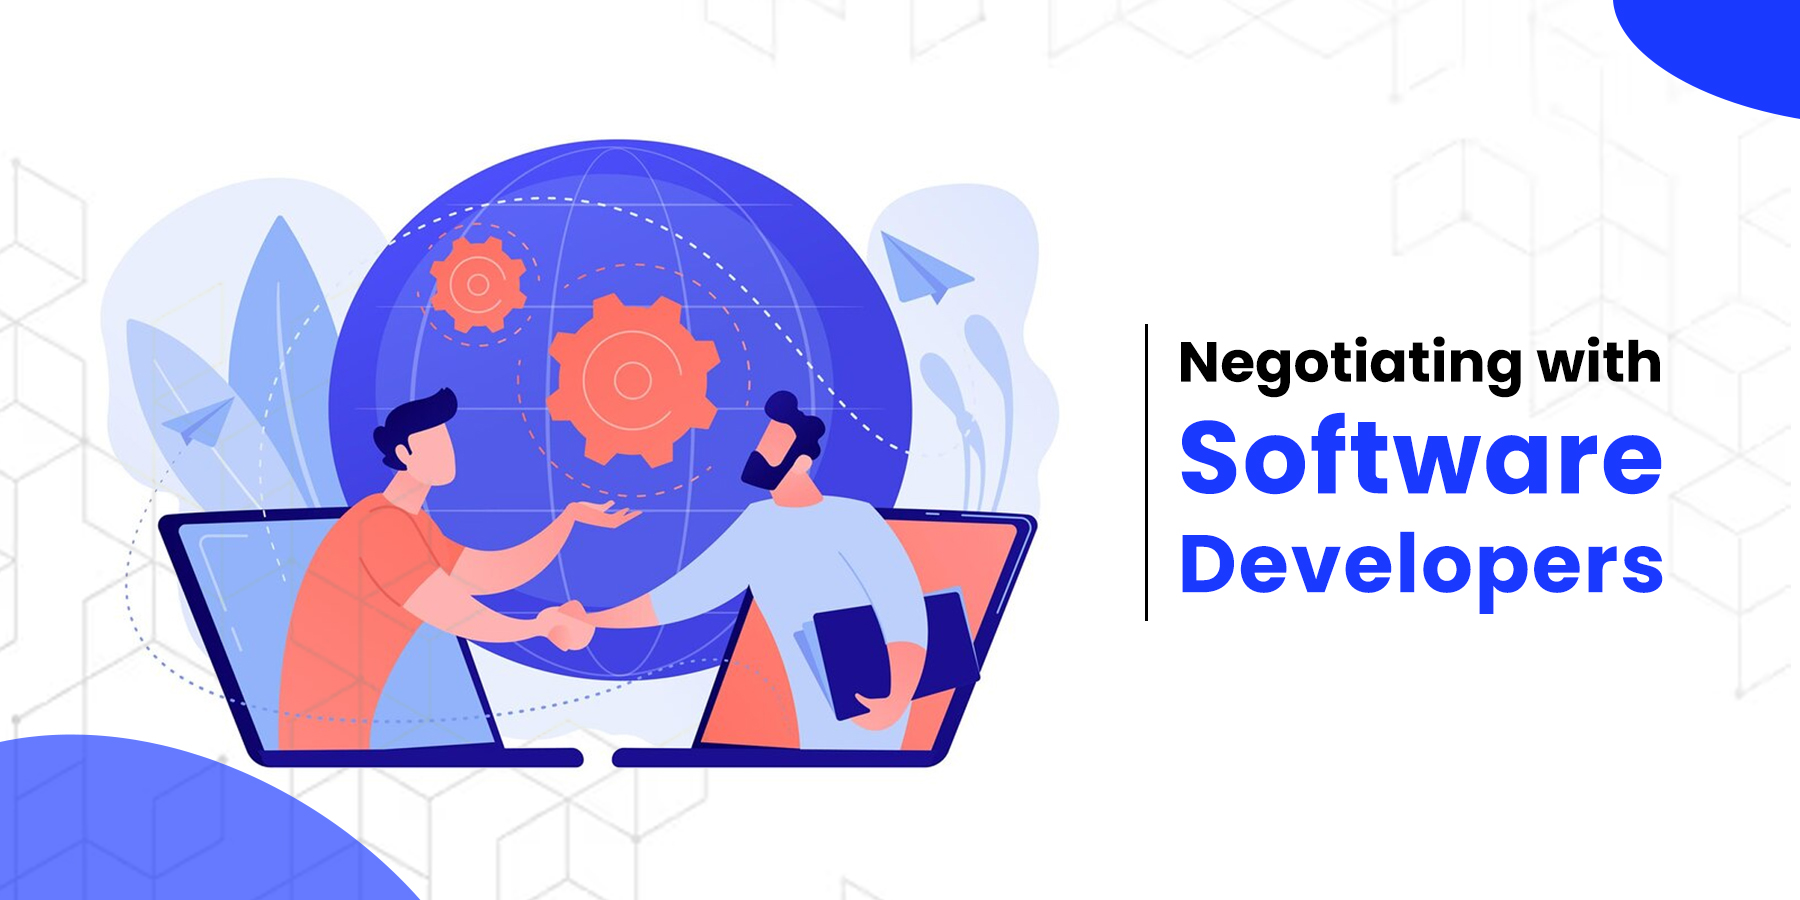 How To Assess And Negotiate With Remote Software Developers?